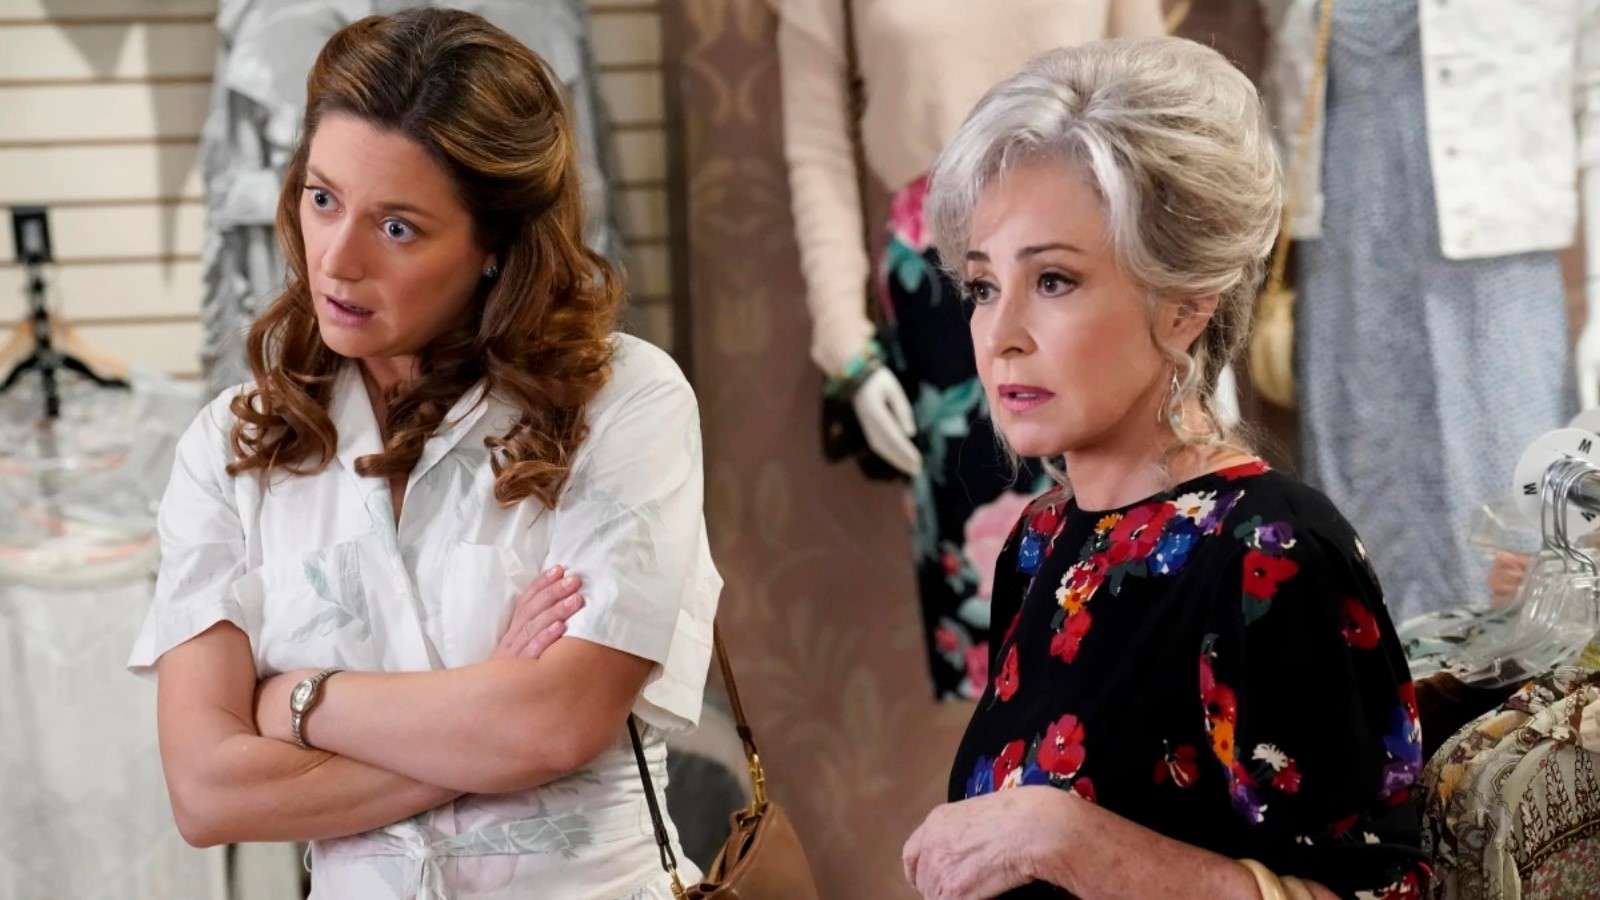 Zoe Perry and Annie Potts as Mary and Connie on Young Sheldon